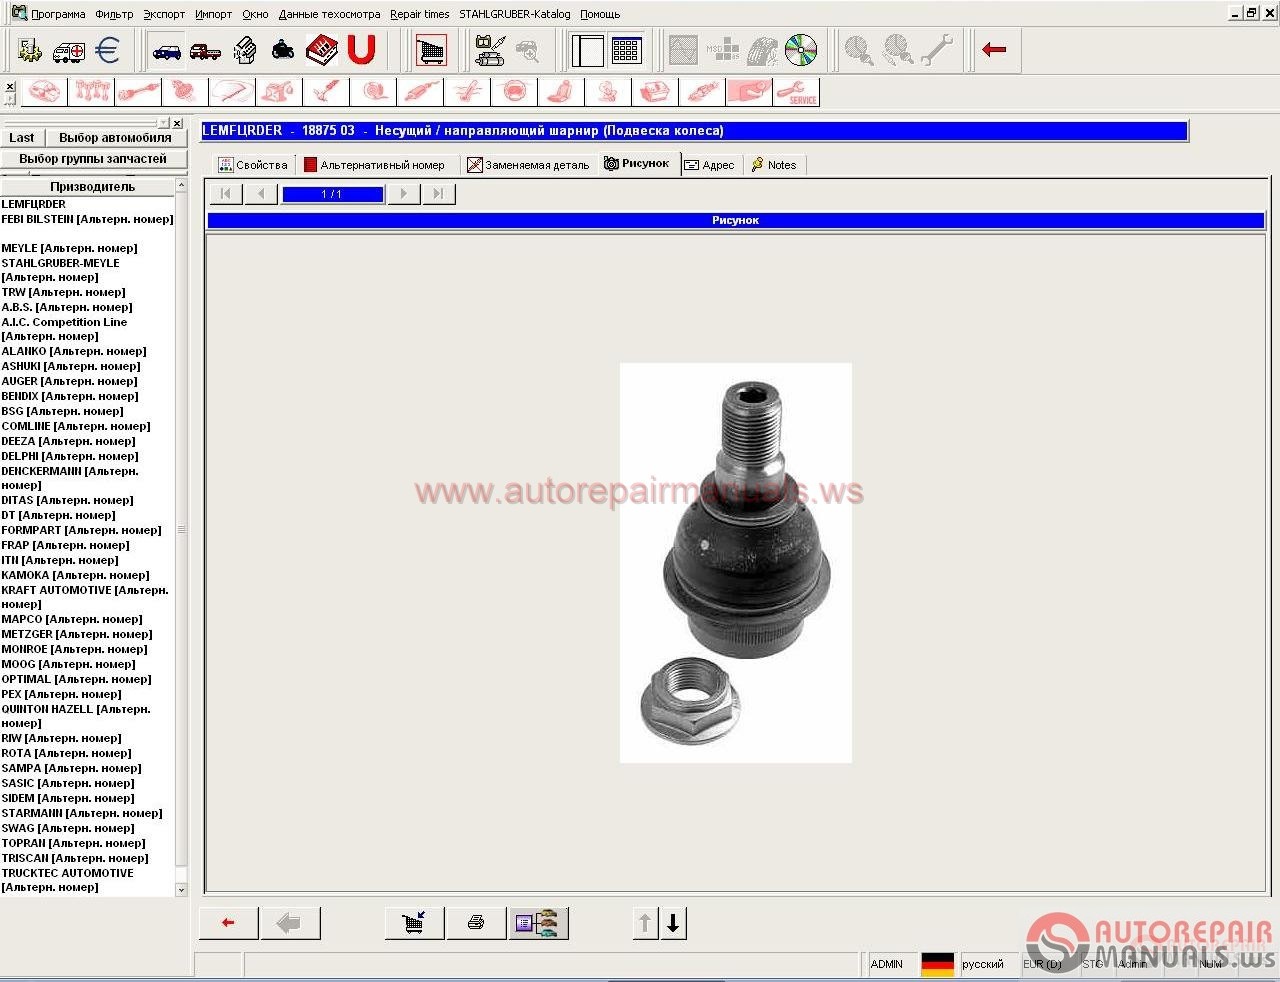 autoship software free download